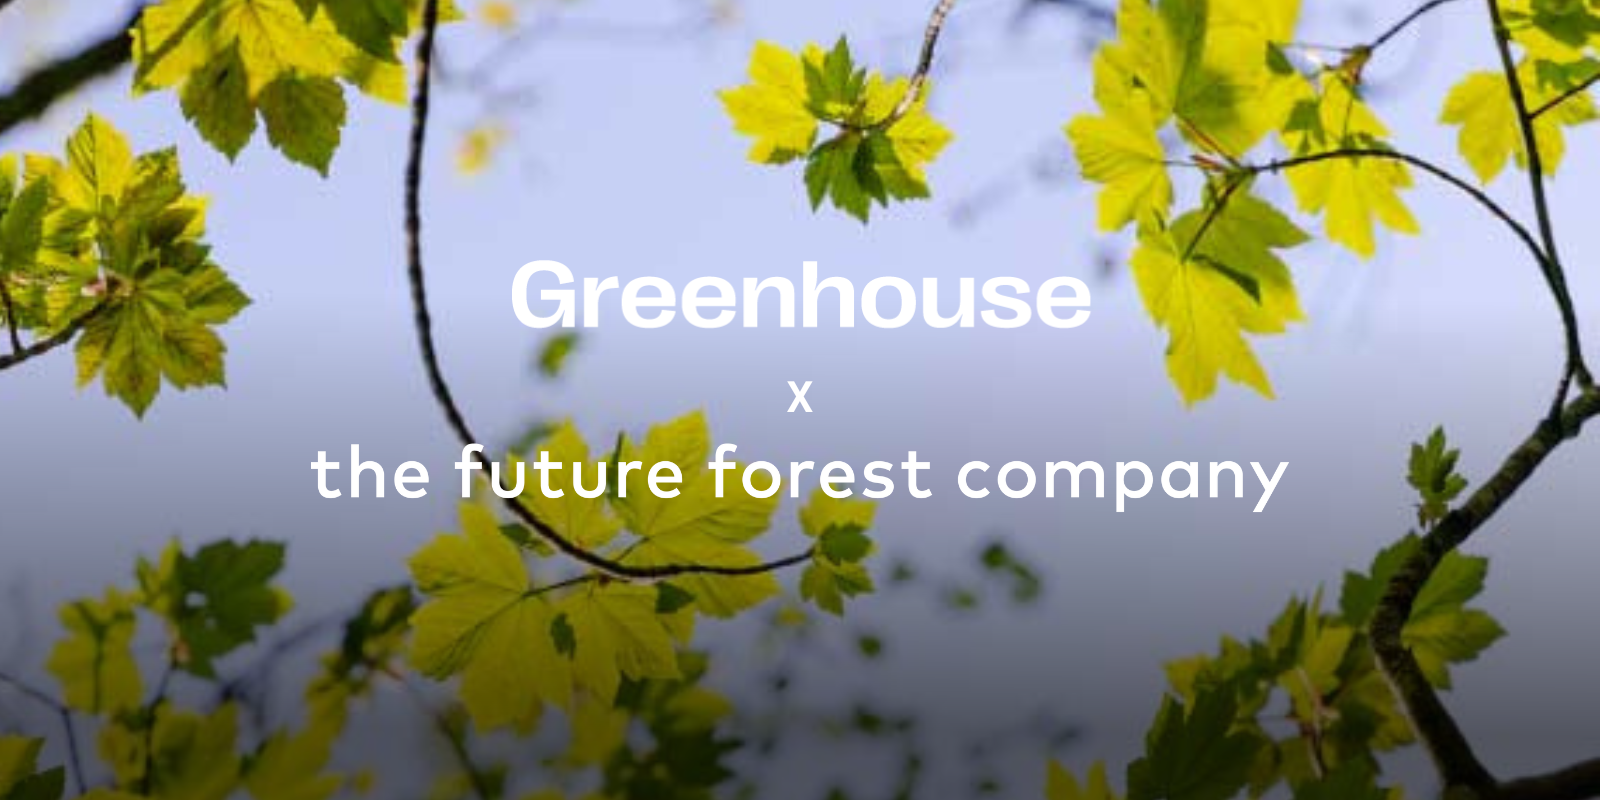 Case Study: Greenhouse Communication's Commitment to Nature-Based Carbon Projects